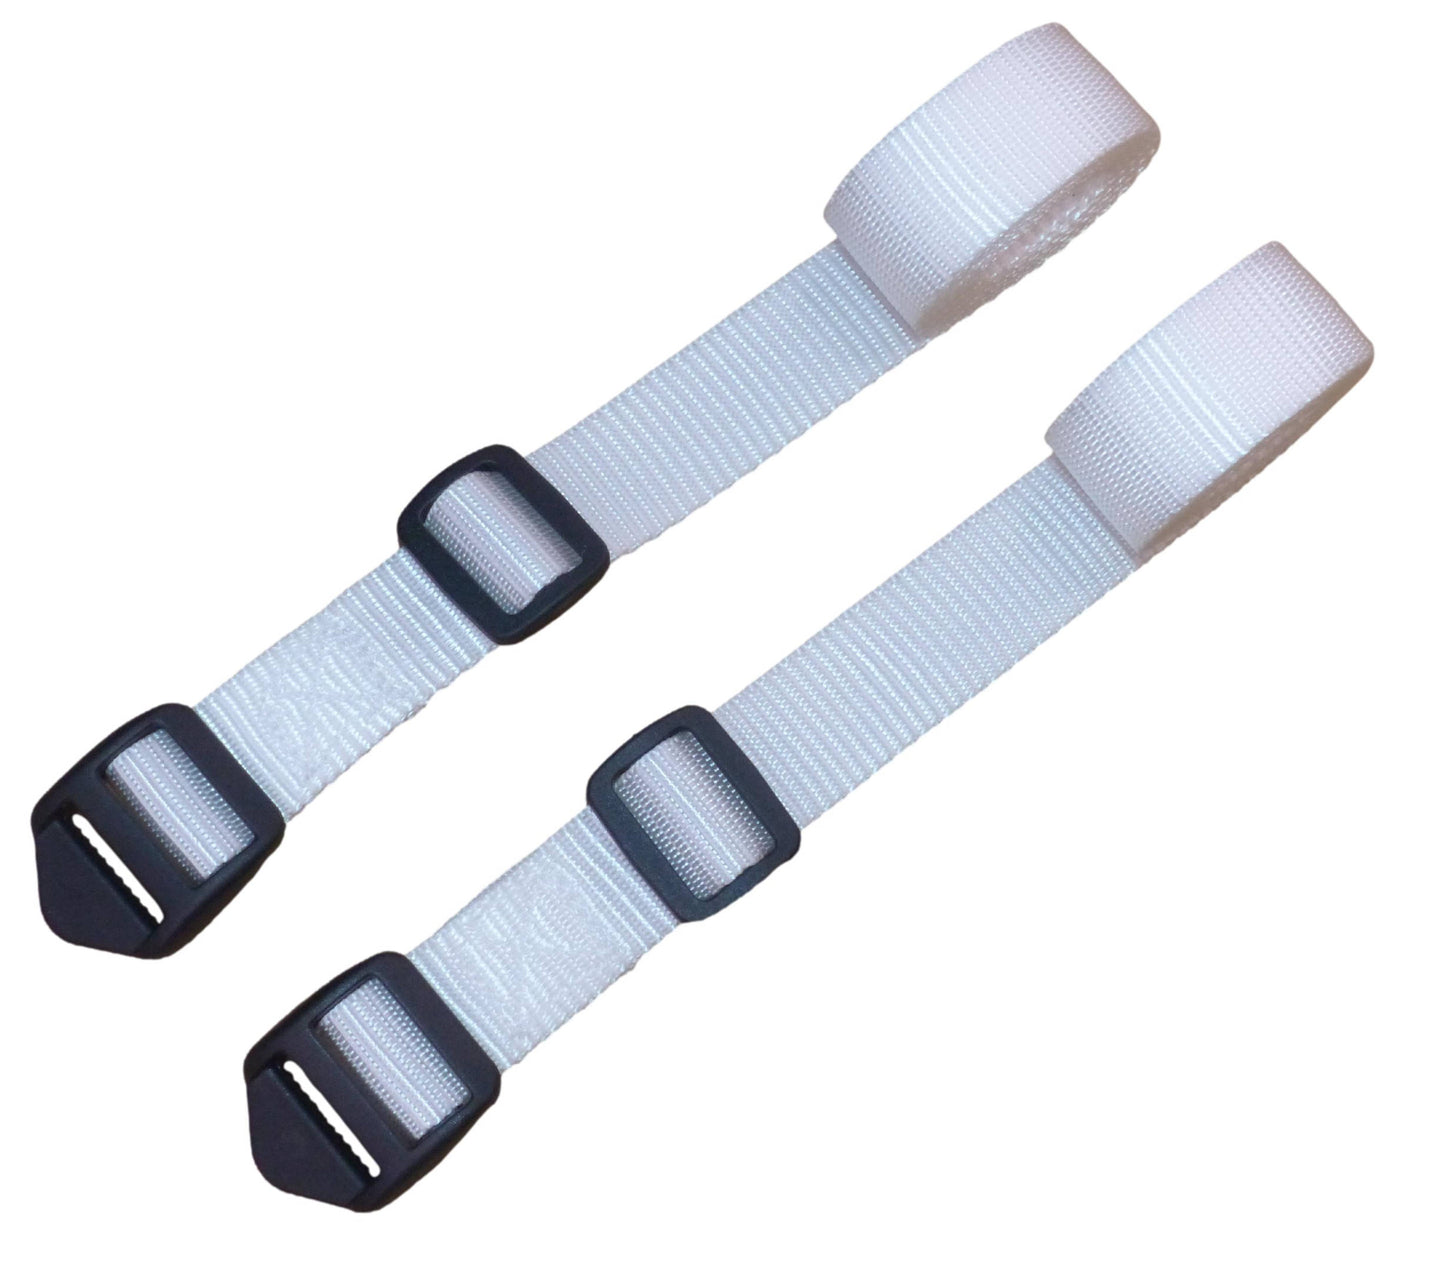 Benristraps 25mm Webbing Strap with Ladderloc Buckle (Pair) in white